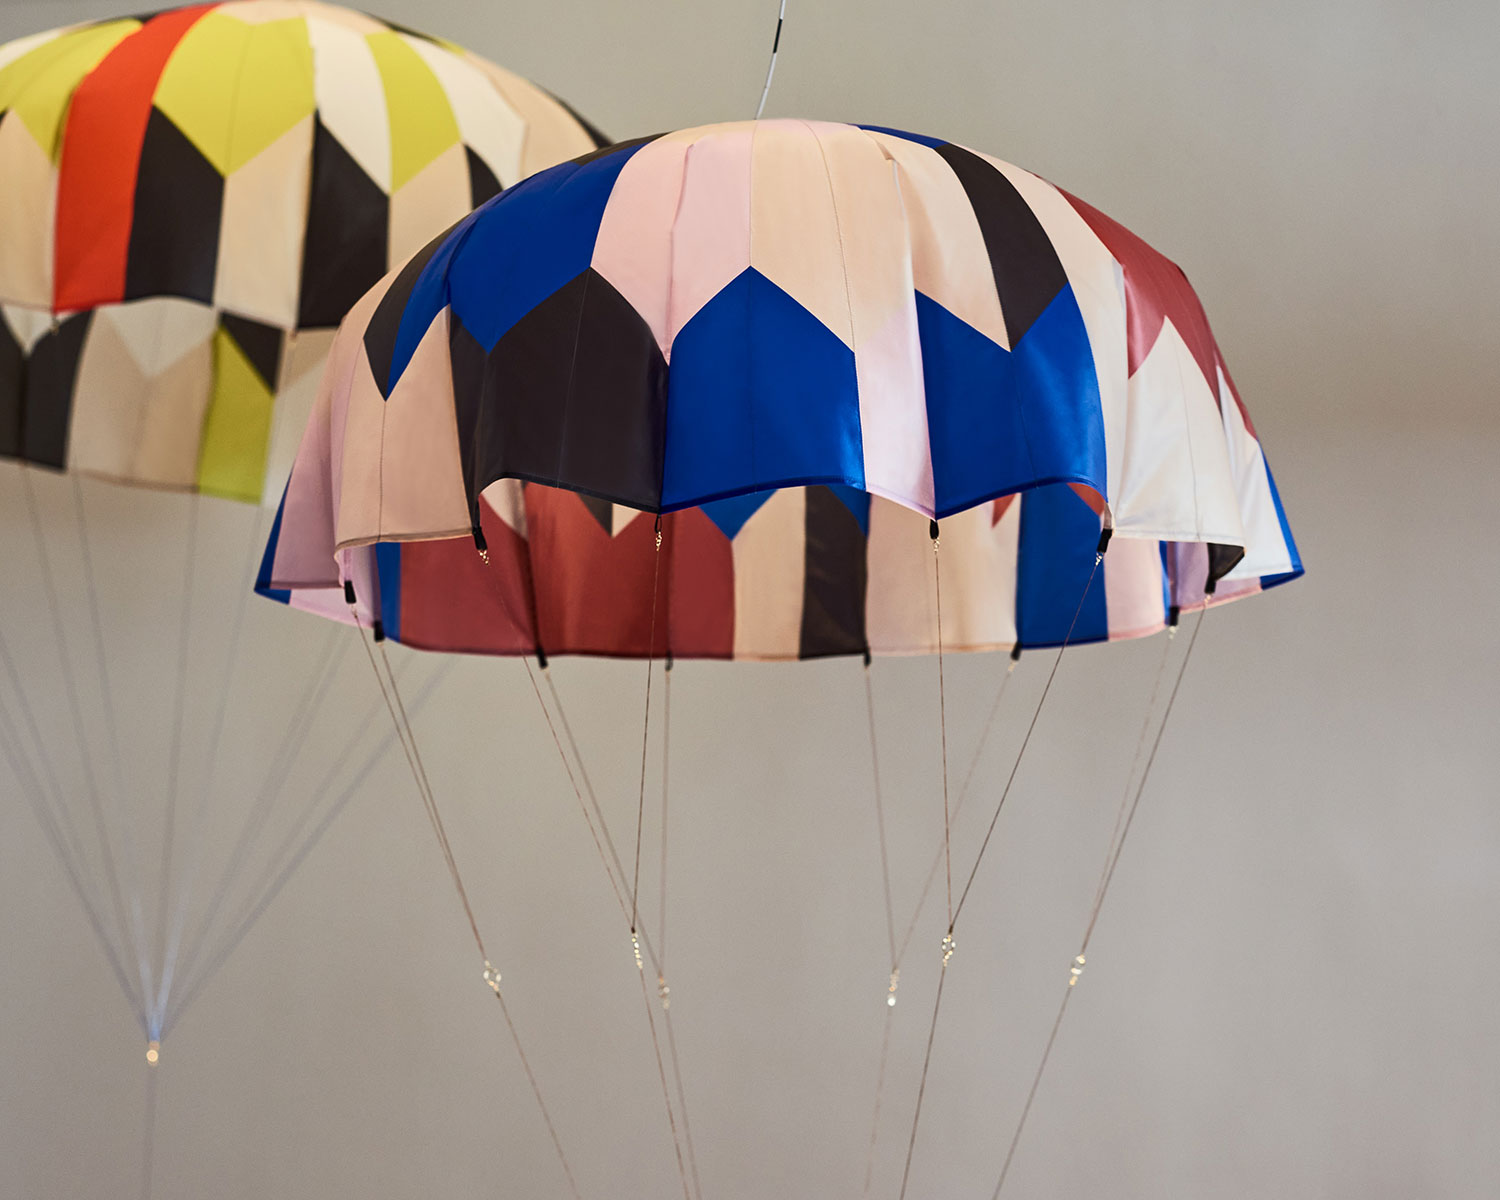 The artworks are inspired from parachutes